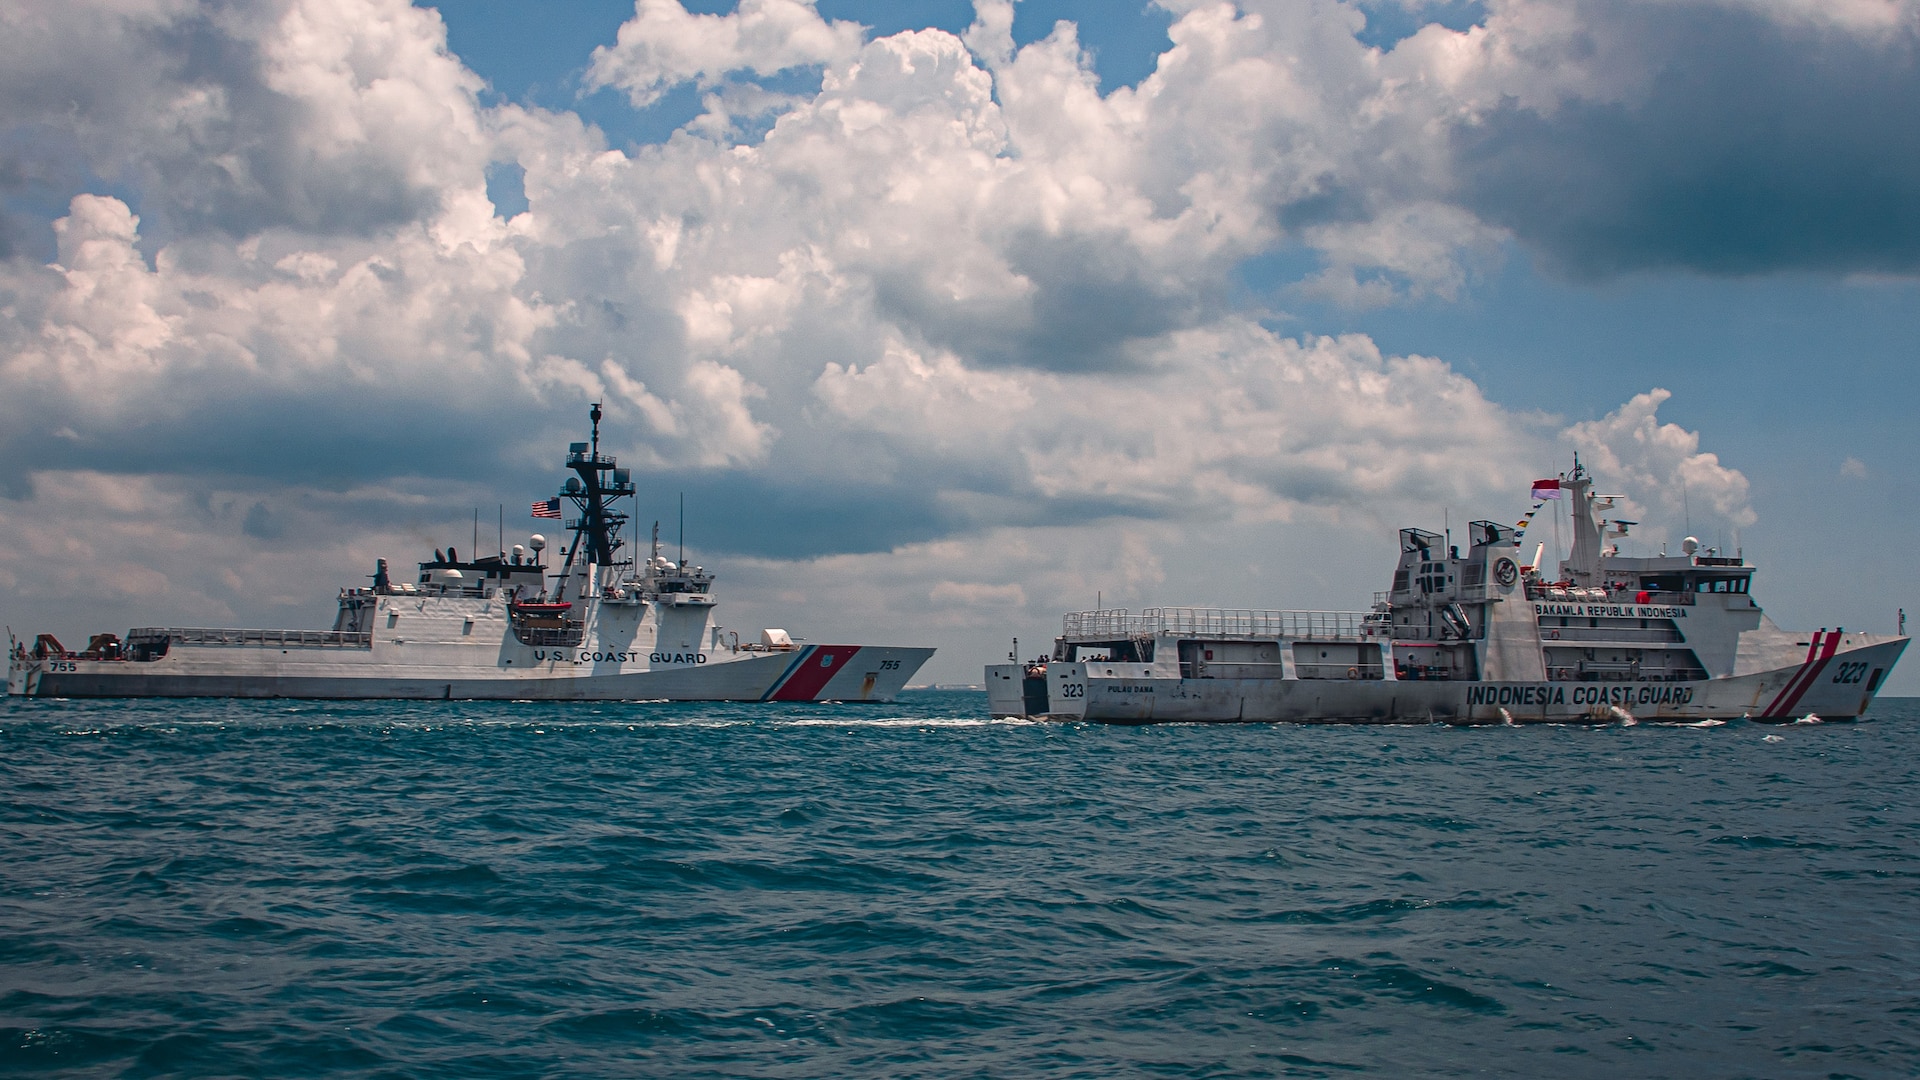 U.S. Coast Guard cutter trains with Indonesia’s Maritime Security Agency